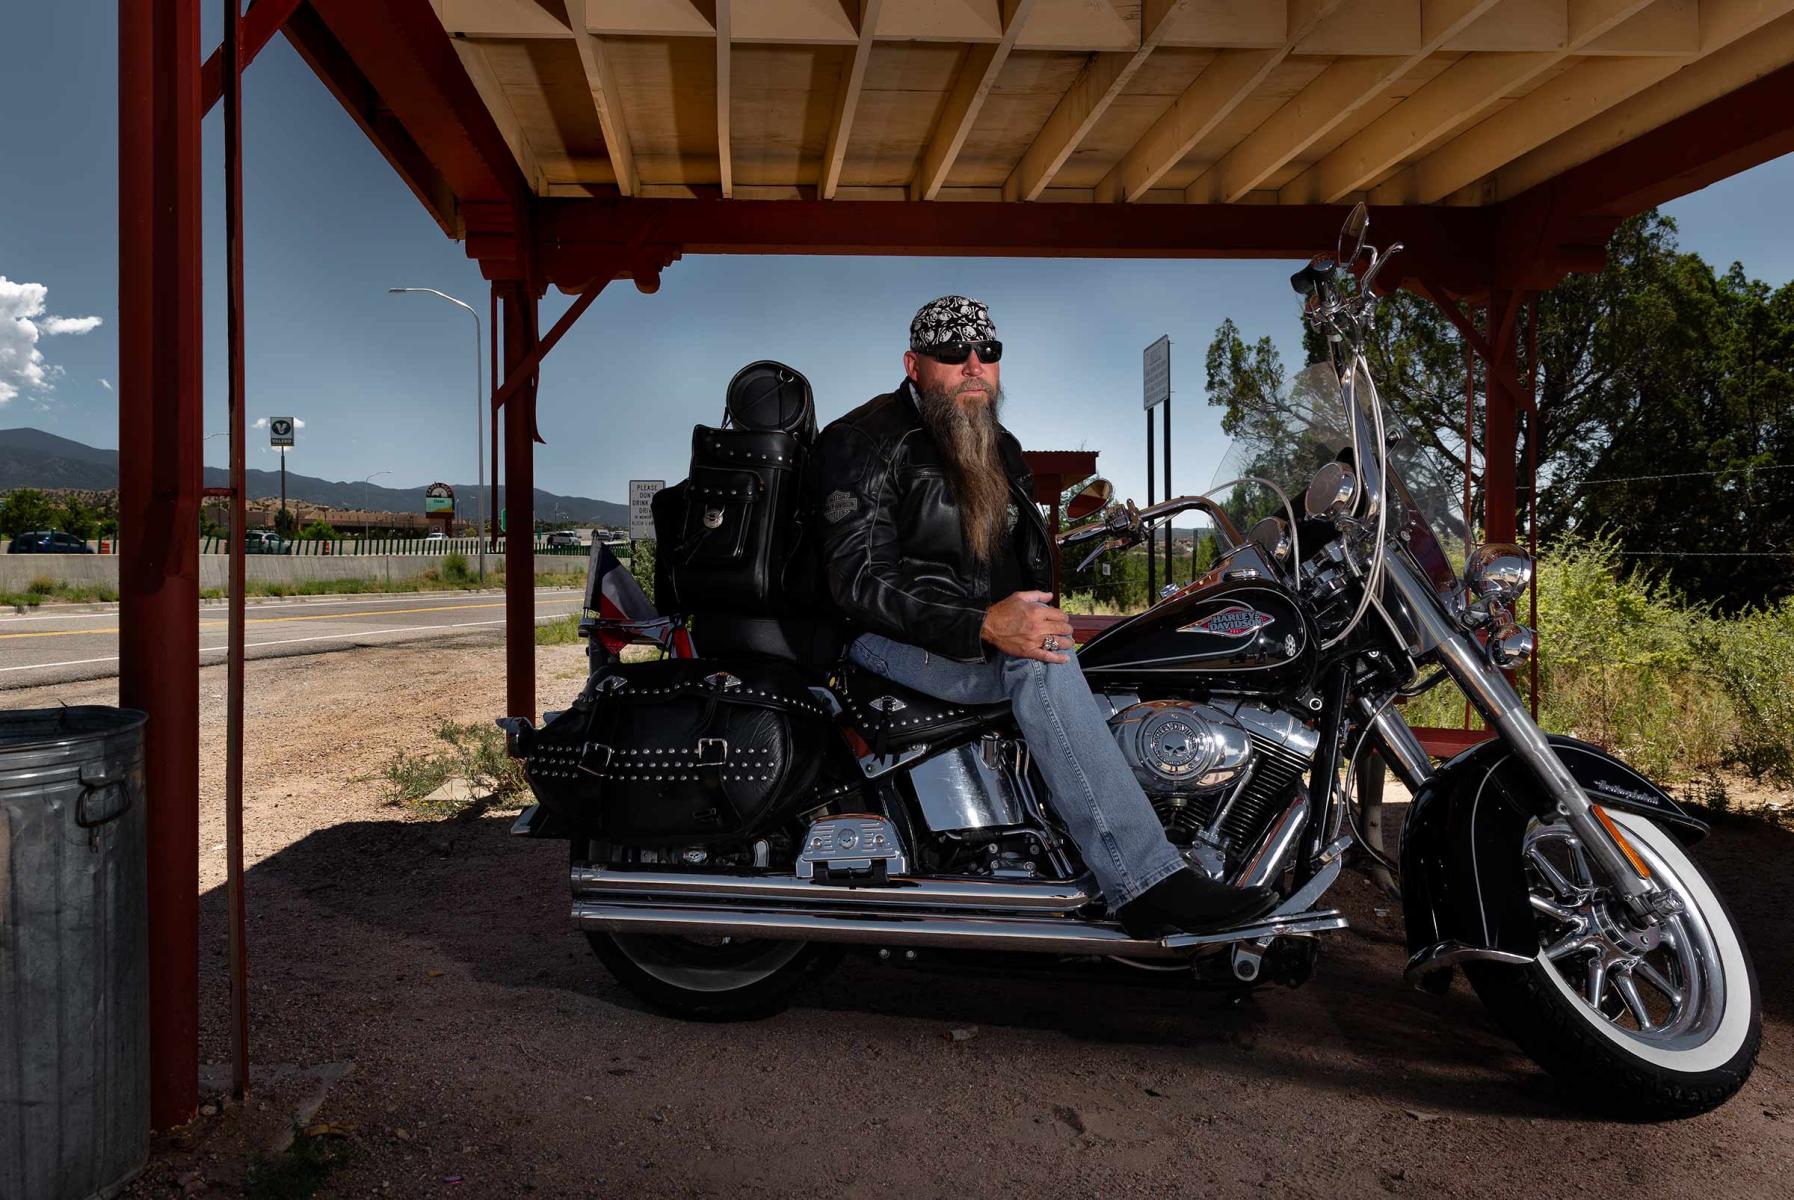 On route from Sante Fe to Alamaso meet a biker from Galvaston, Texas.
We talked about travels though America. : Visiting Mom : New York City based photographer and video specializing in portrait corporate portraits, video, editorial stories for on location and architectural photography